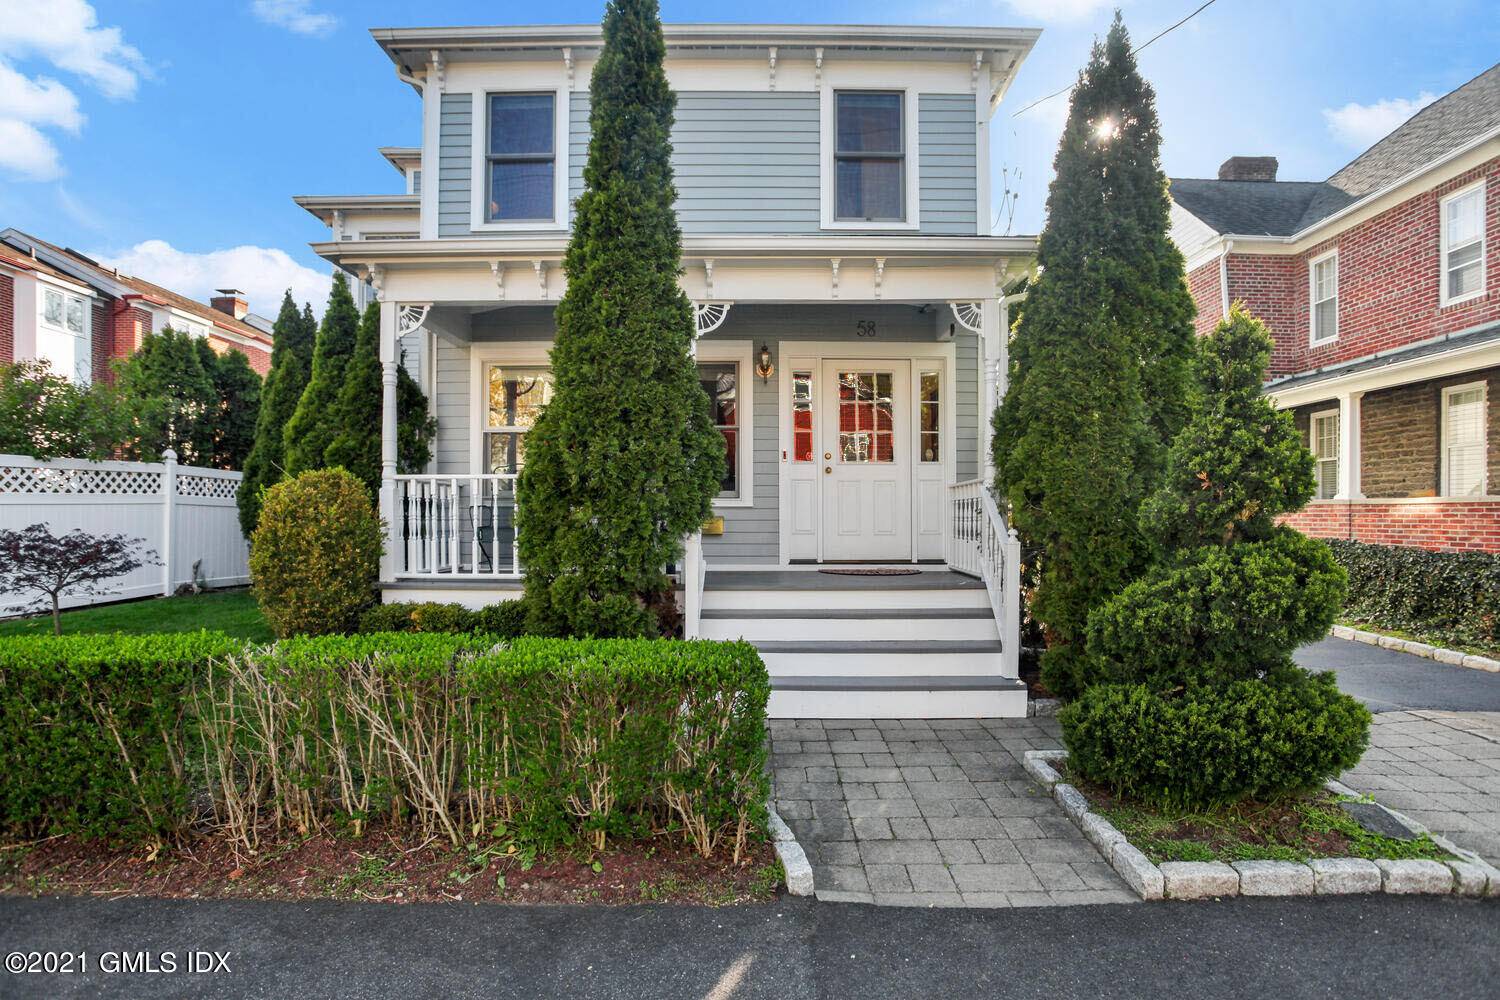 Conveniently located in the heart of downtown Greenwich, this renovated and expanded home is close to Greenwich Avenue's renowned shopping and restaurants as well as Whole Foods and Starbucks.